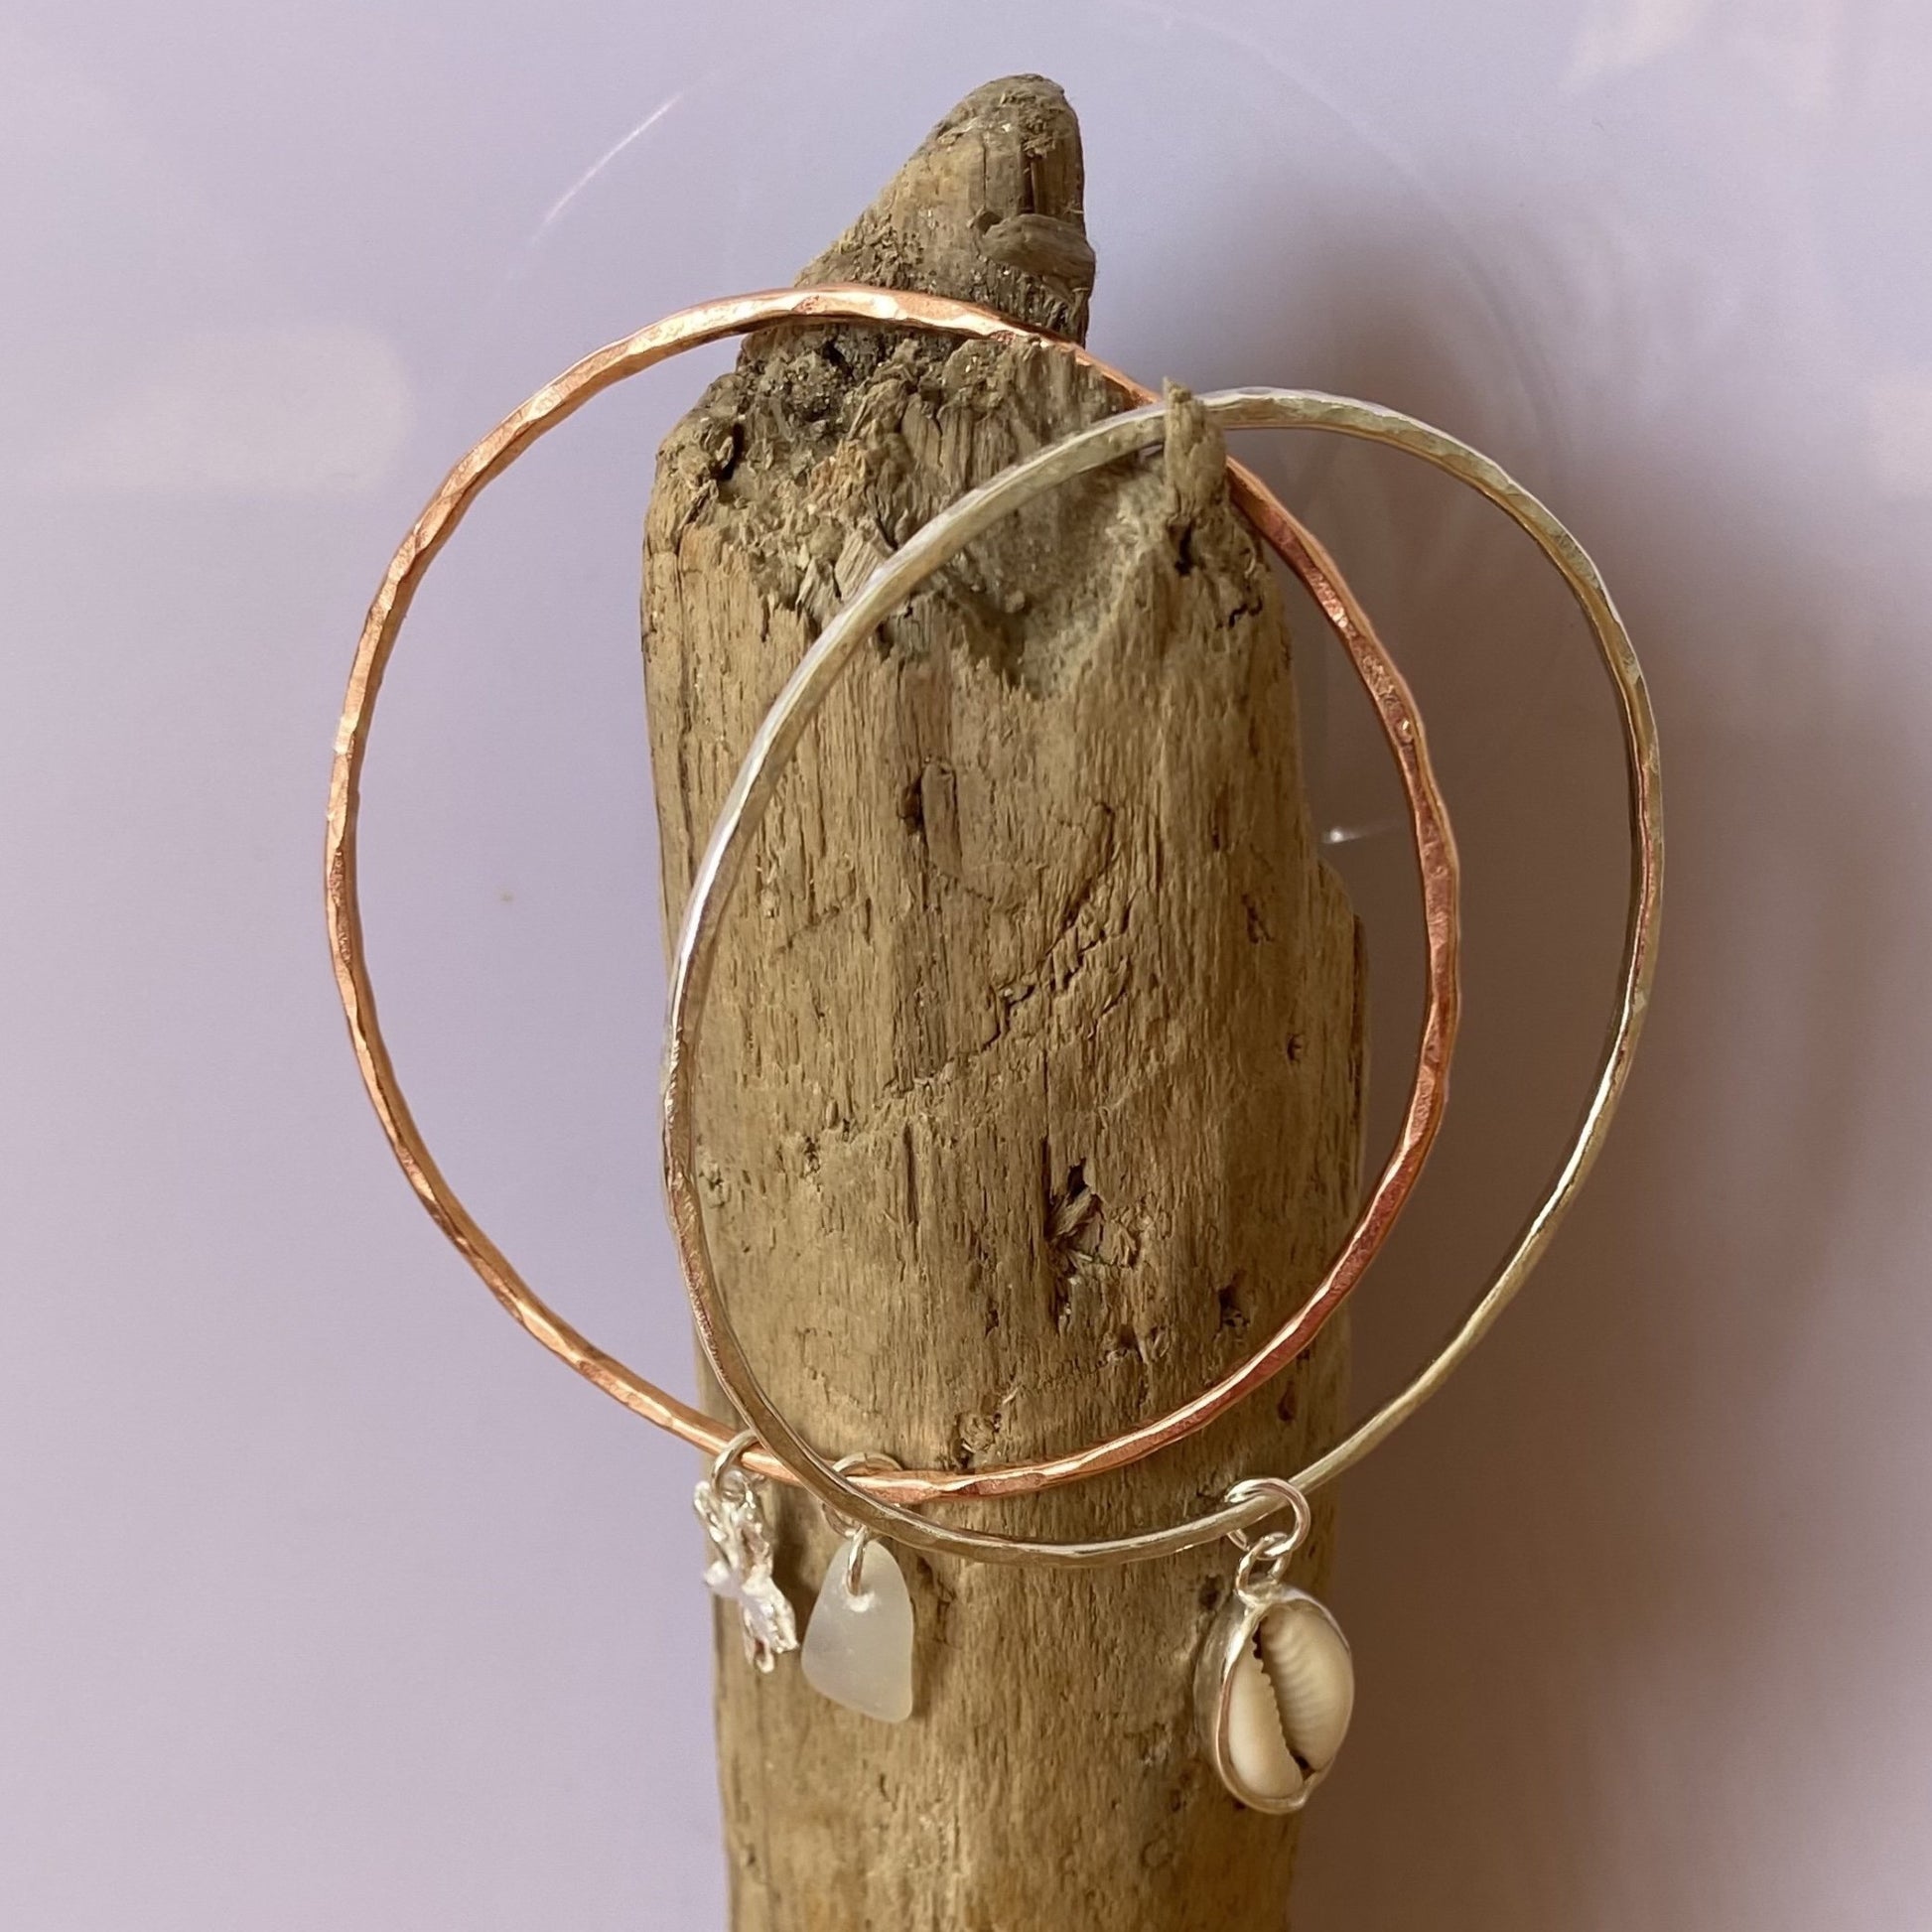 Copper Bangle with Charm - Love Beach Beads